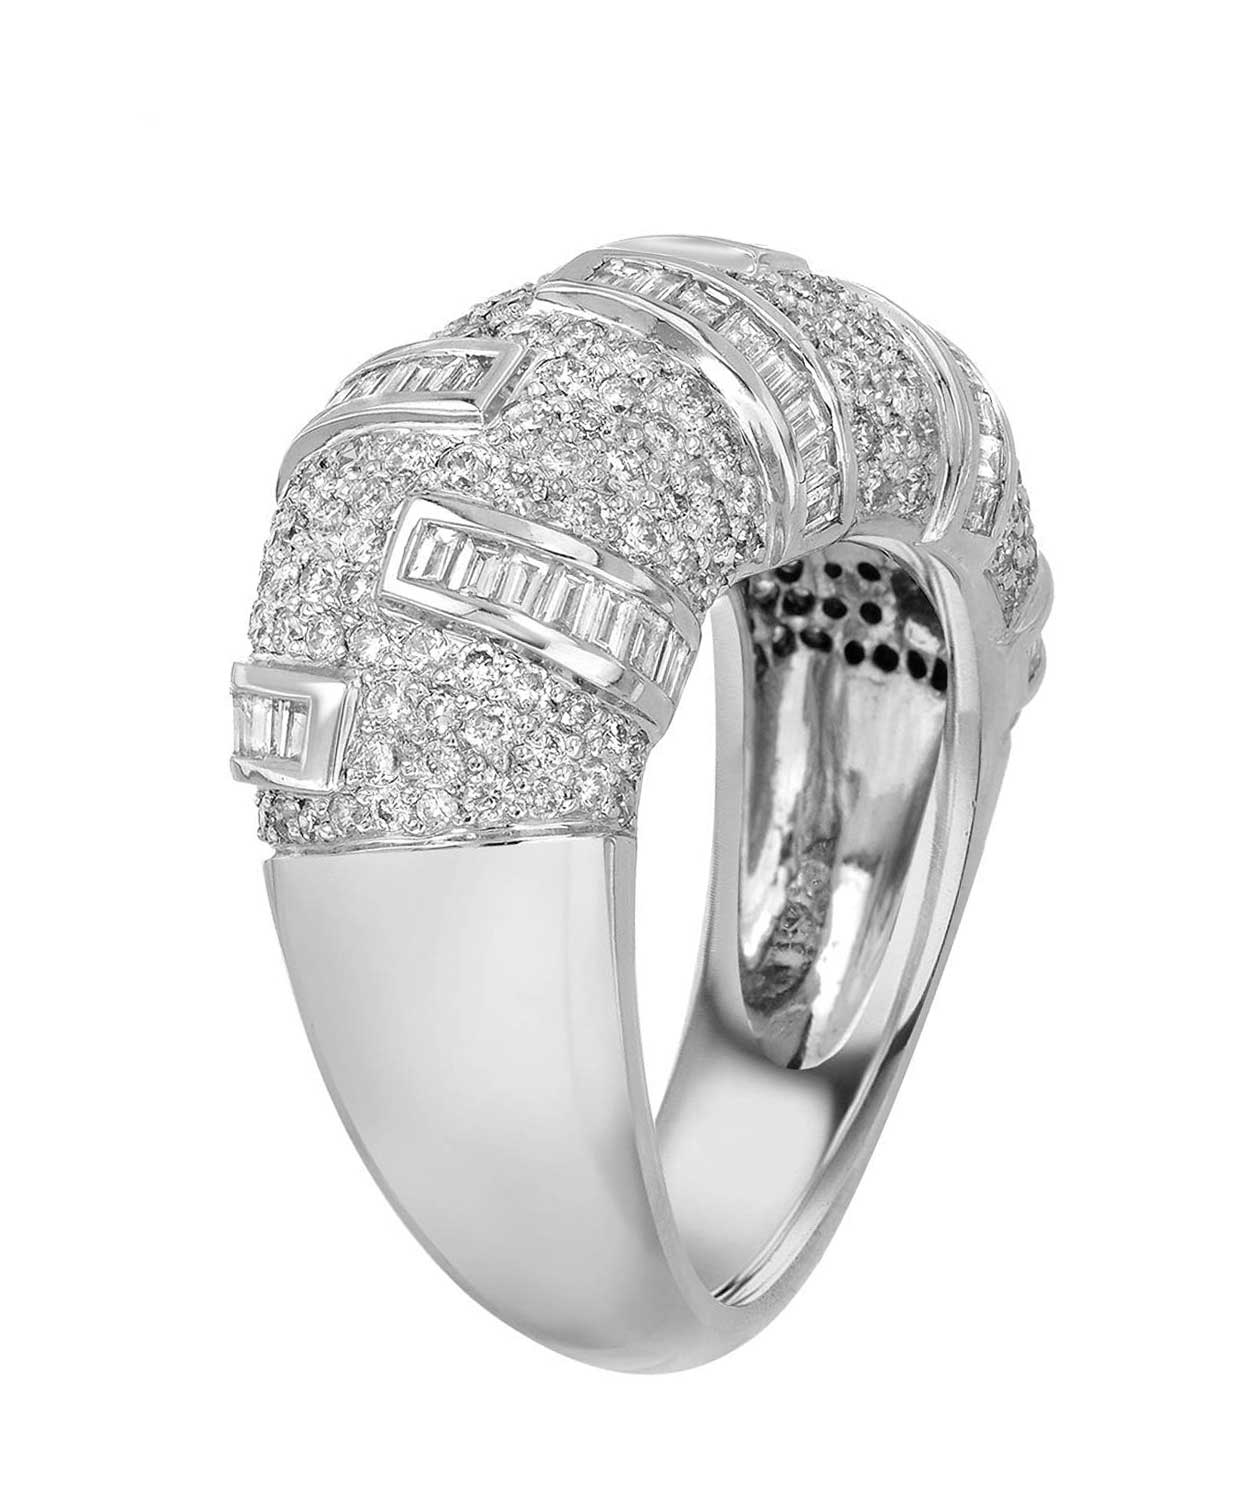 Allure Collection 1.75 ctw Diamond 14k White Gold Right Hand Ring View 2